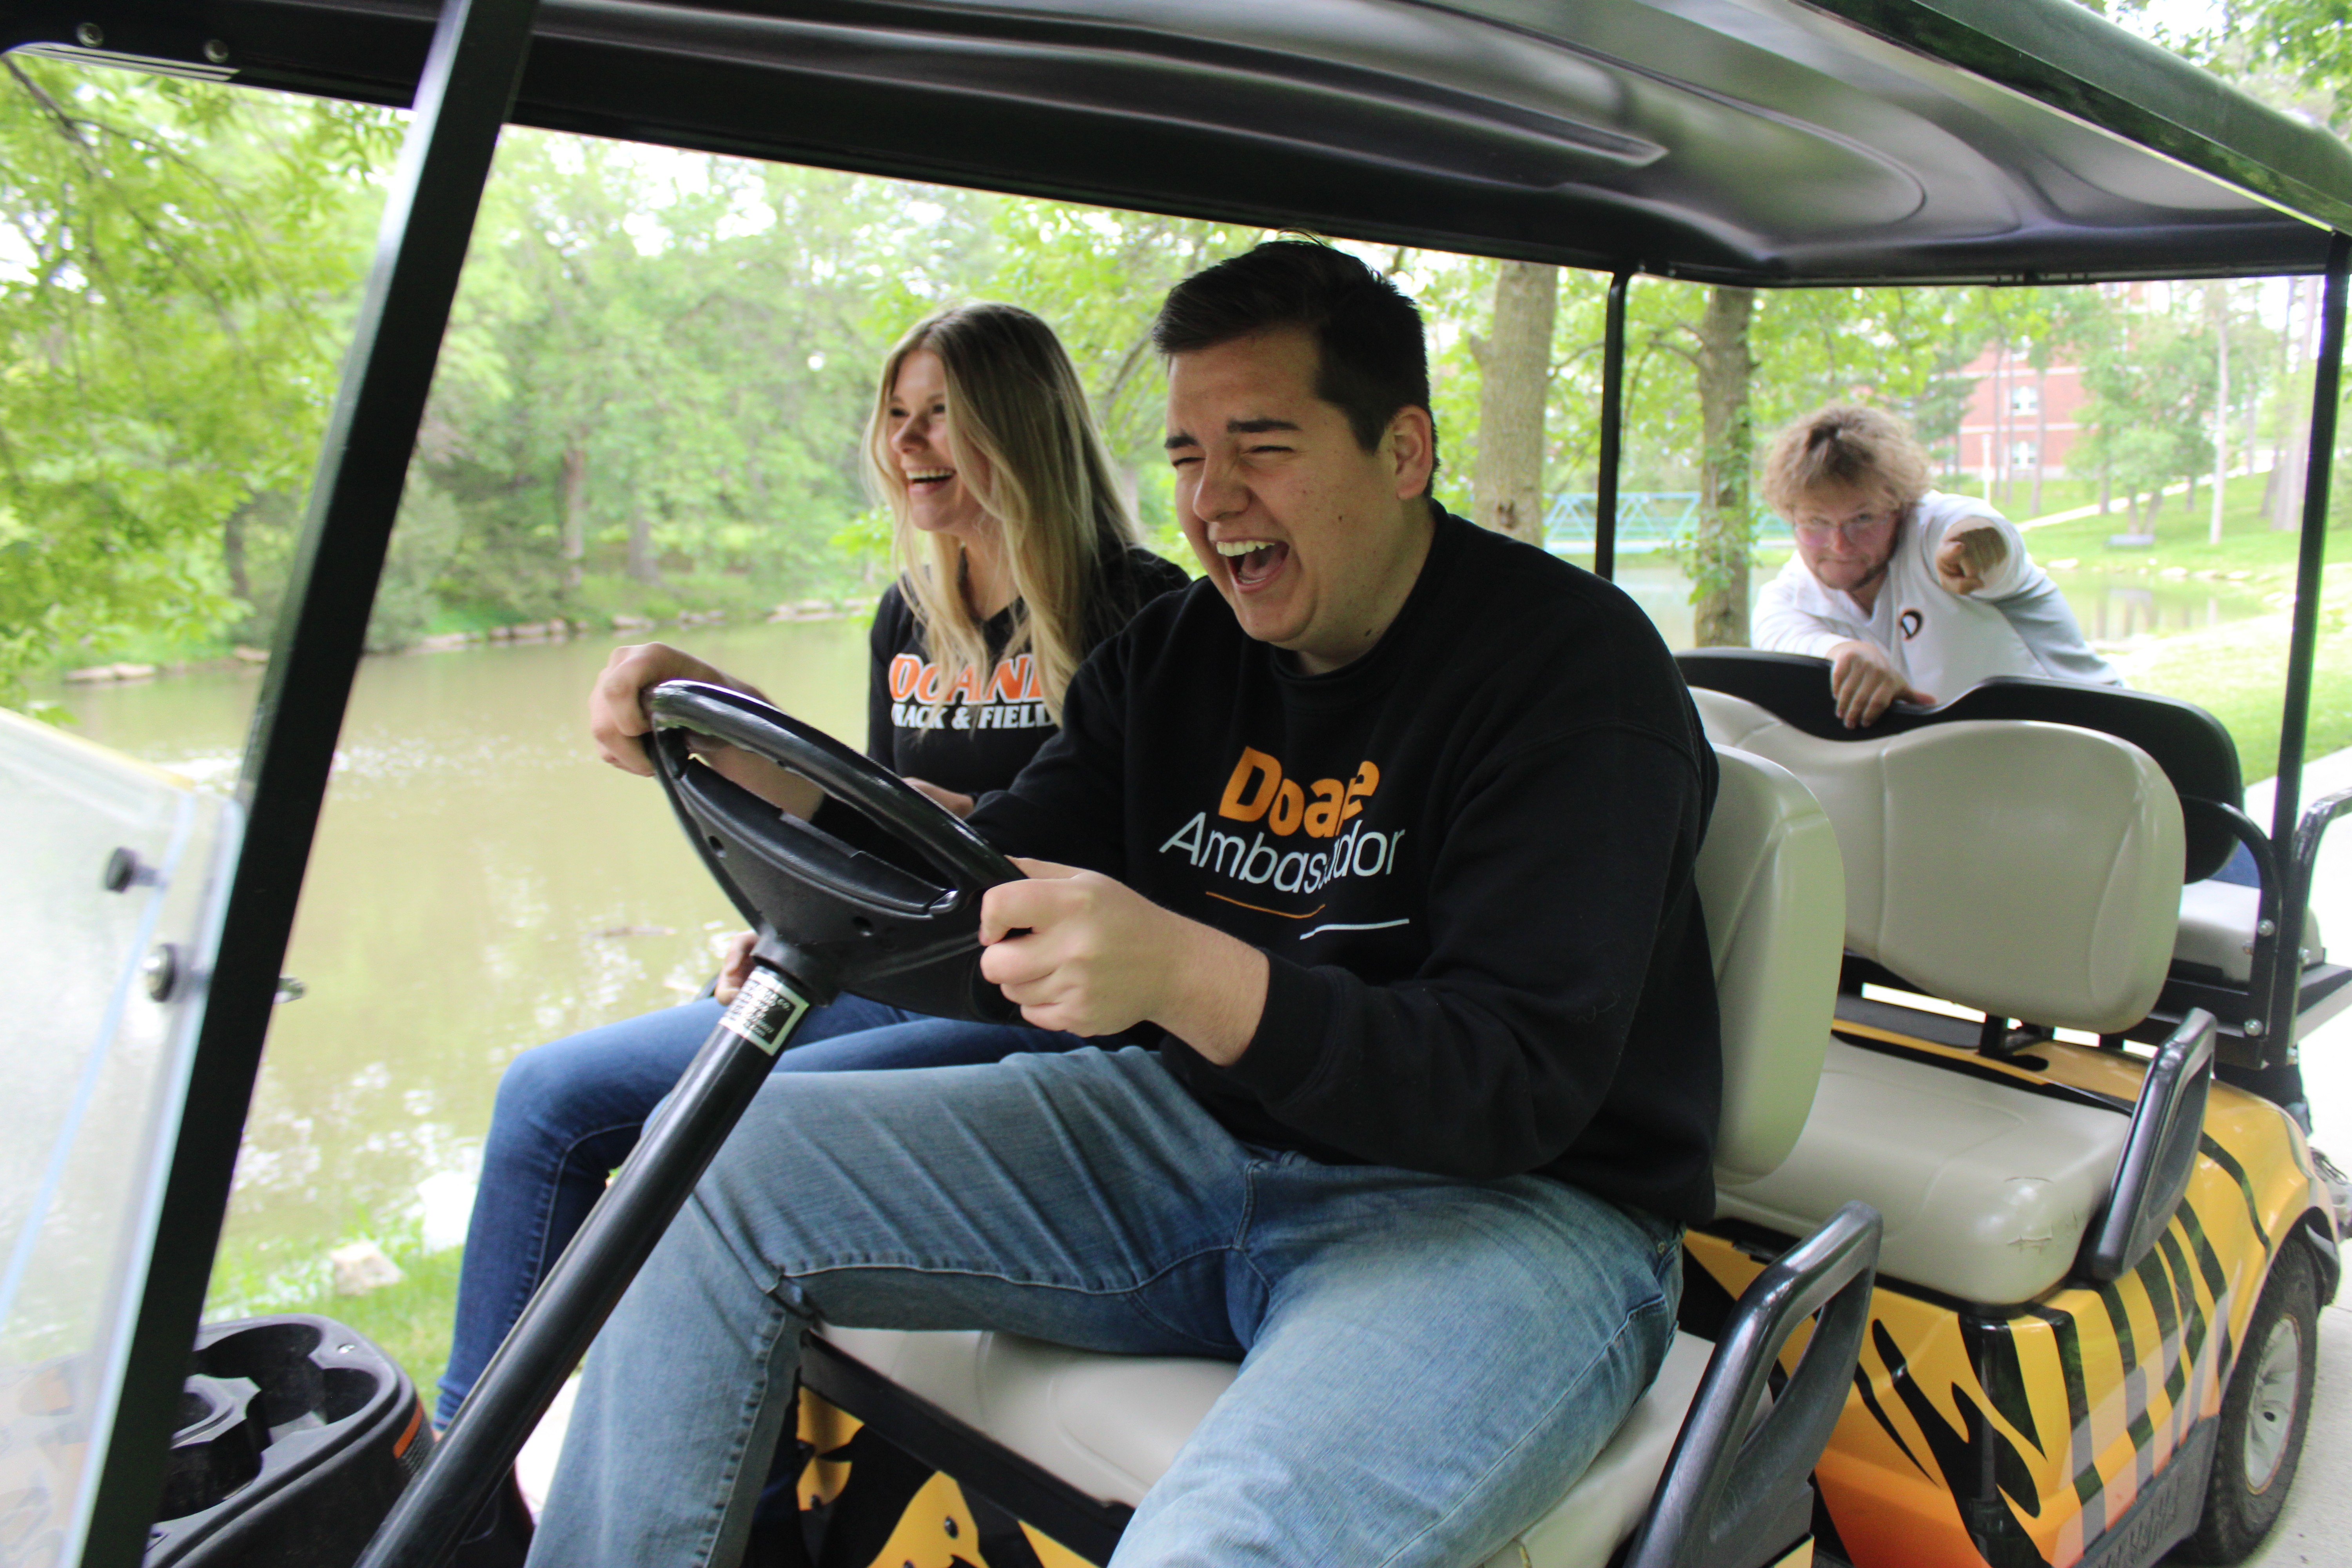 Two Doane alumni driving a golf car, with big smiles.